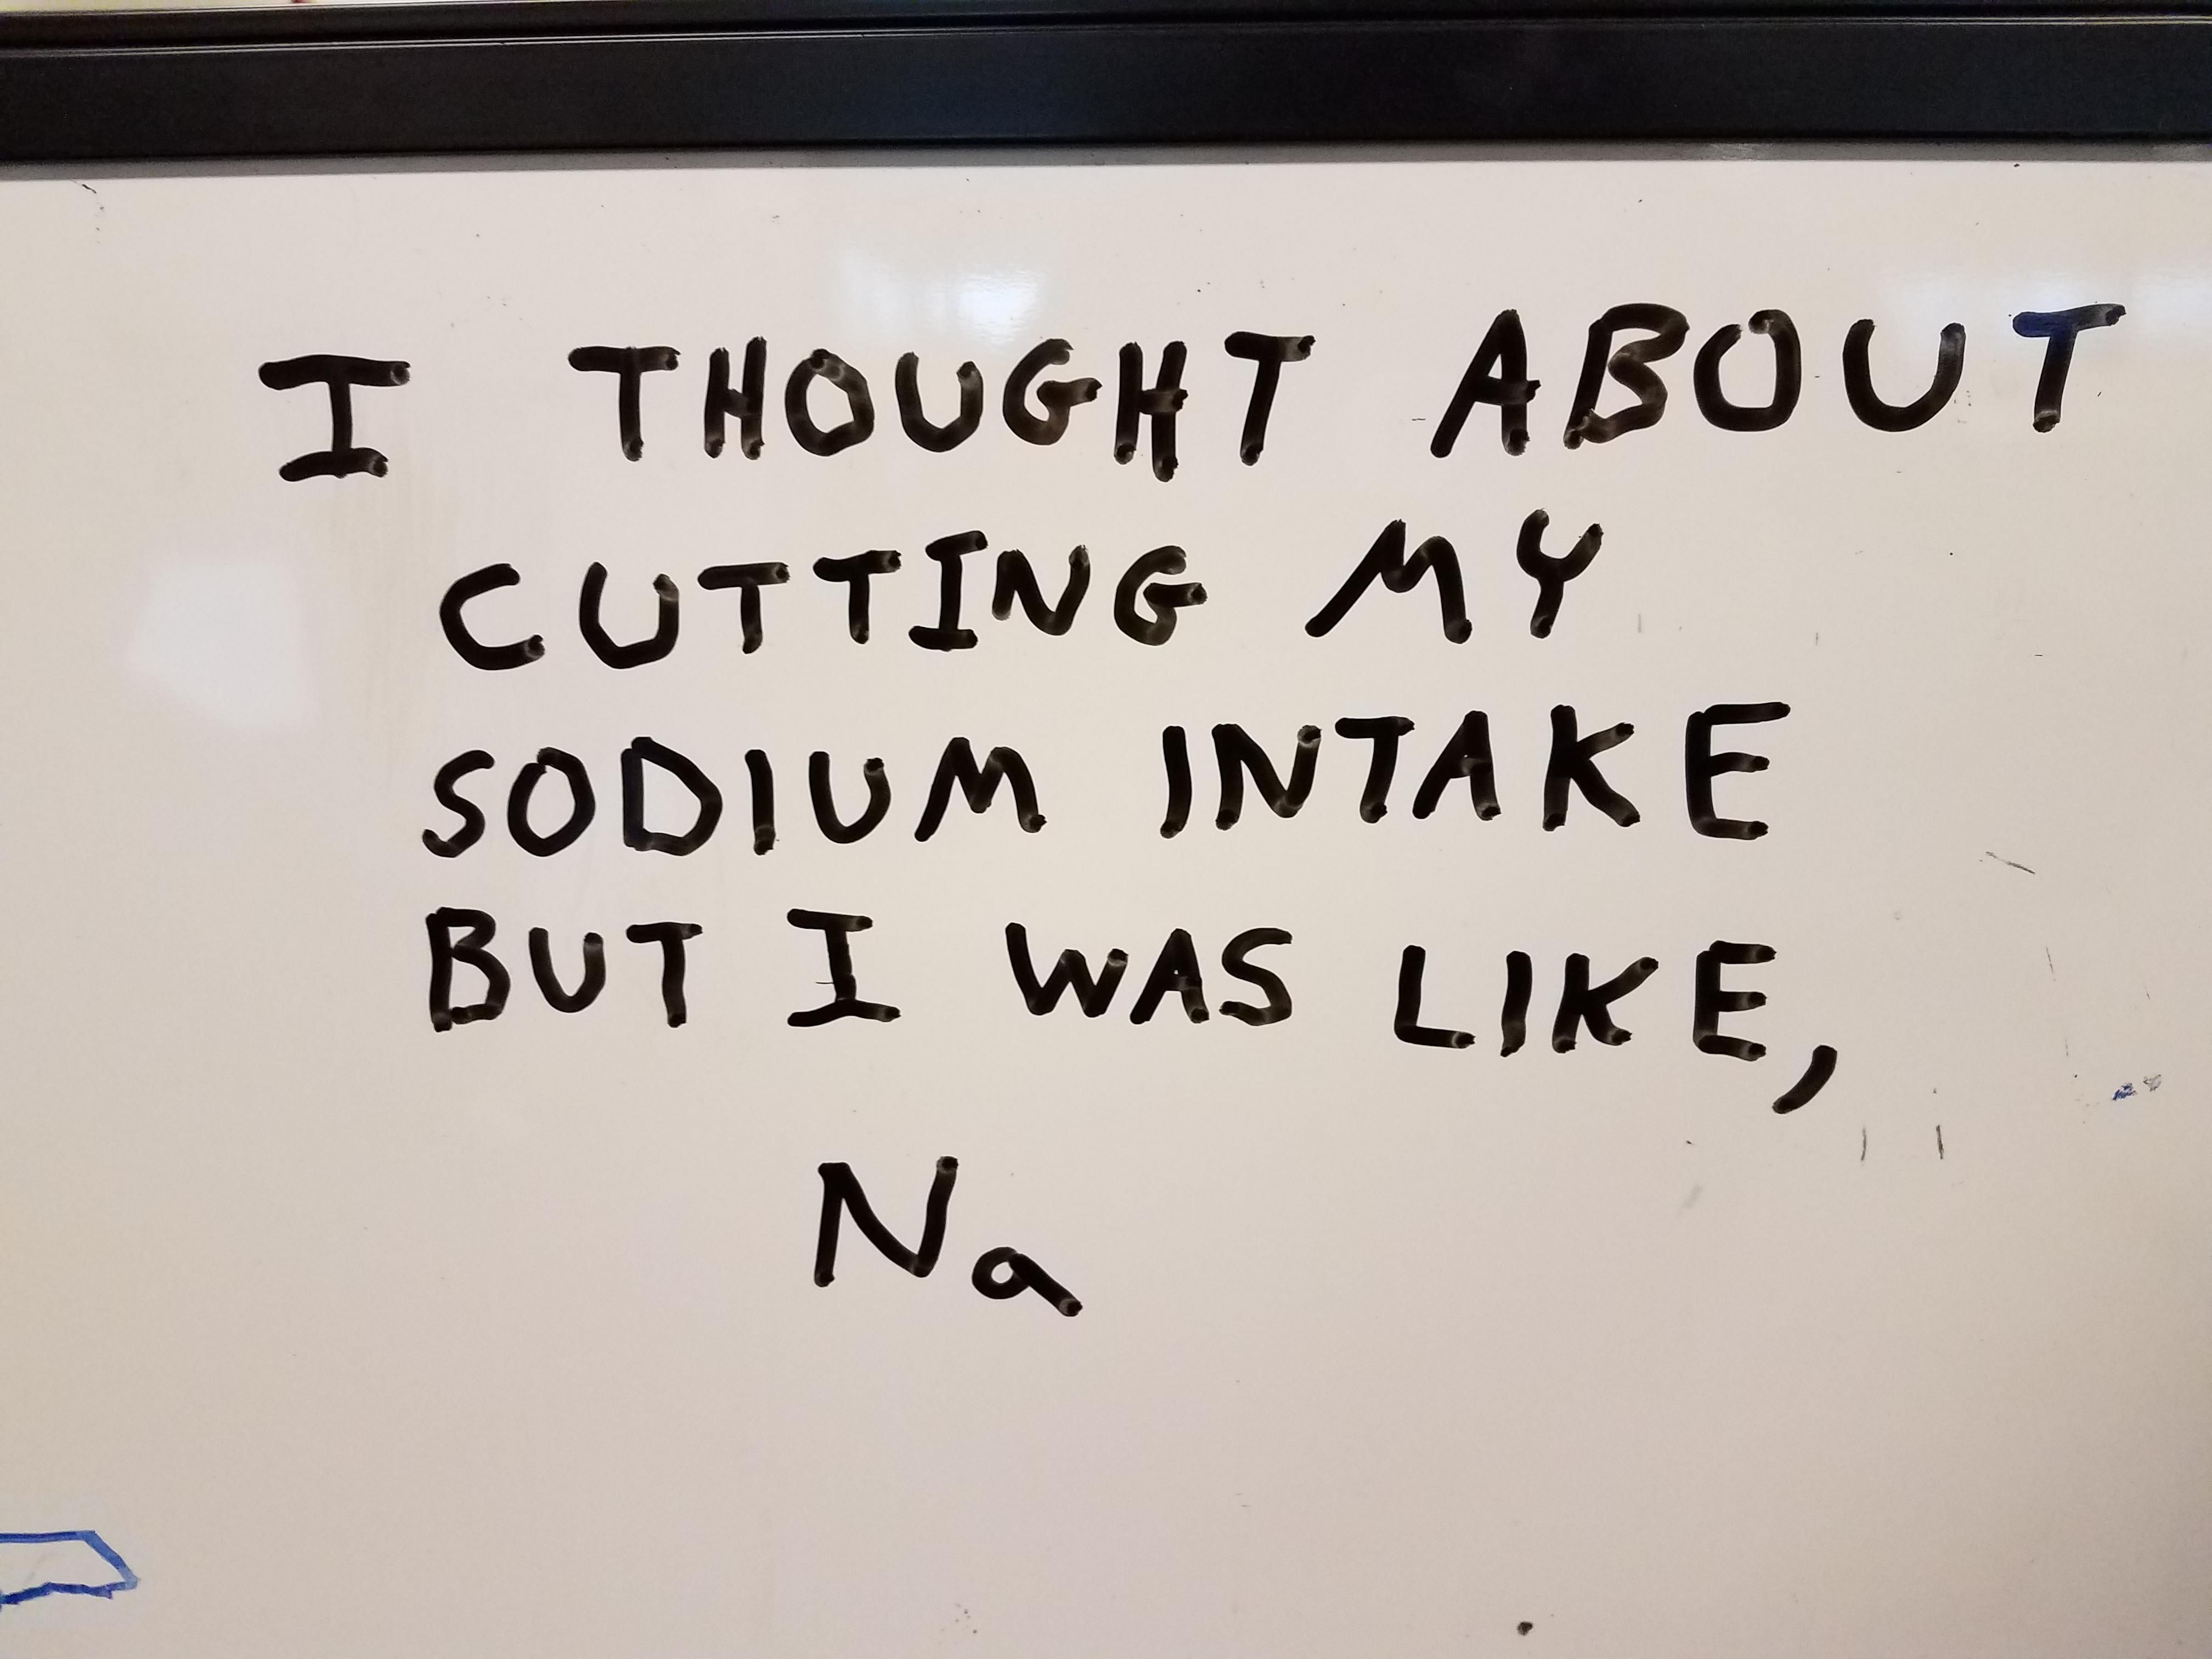 A little chemistry humor from a coworker.